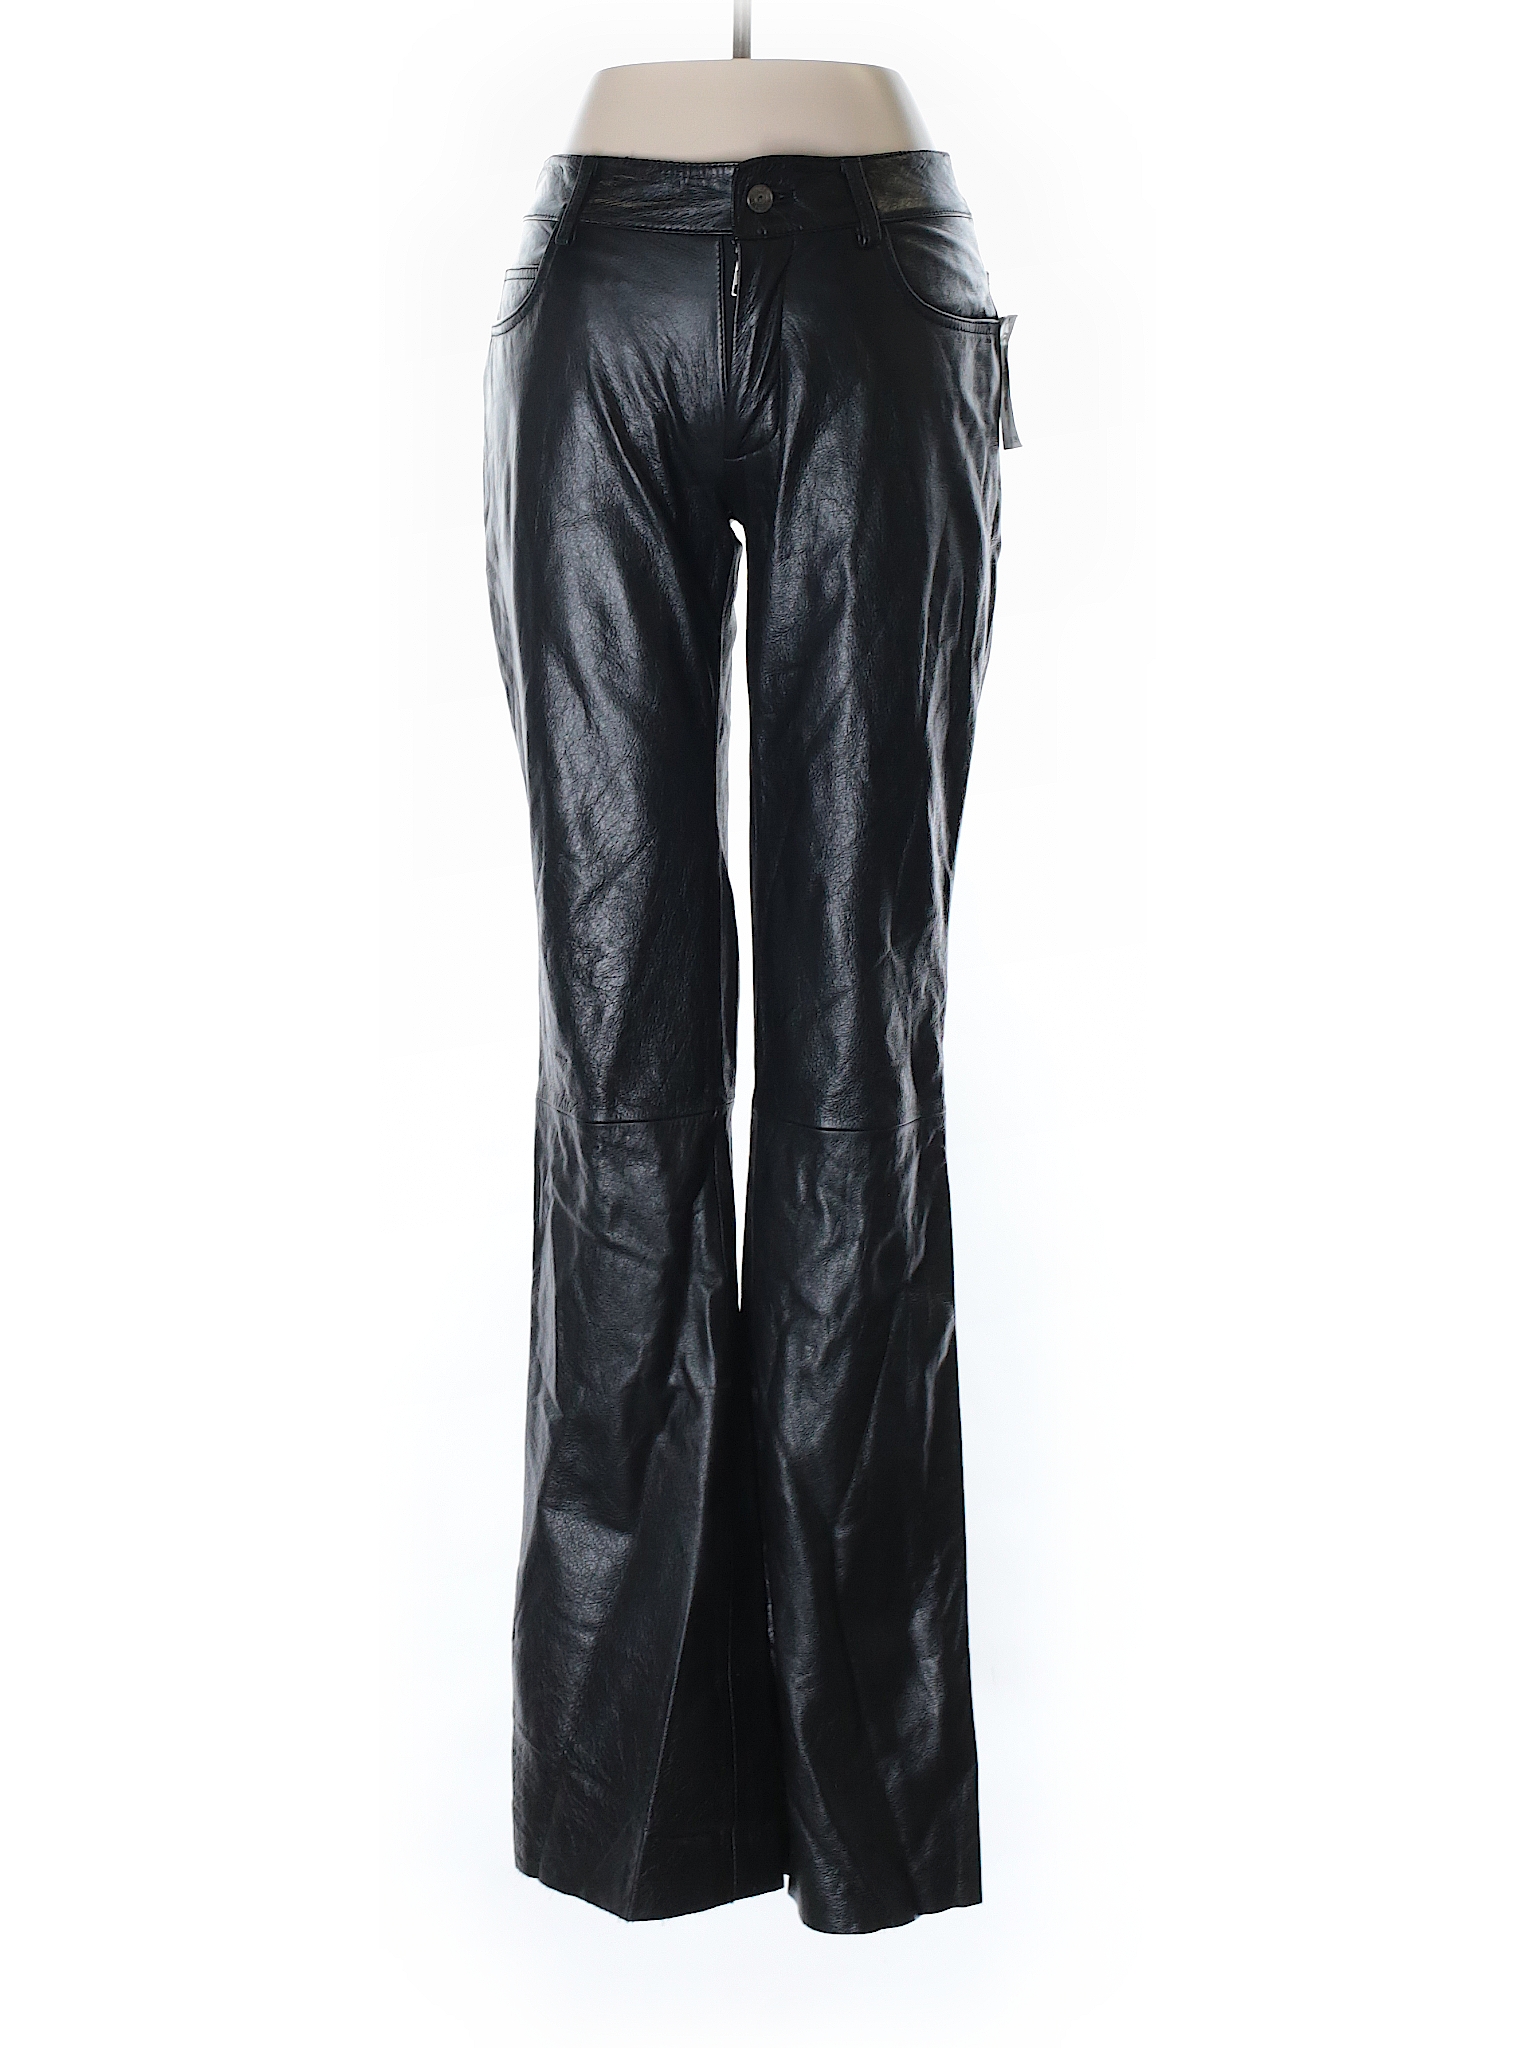 Wilsons Leather Maxima 100% Leather Solid Black Leather Pants Size 4 ...